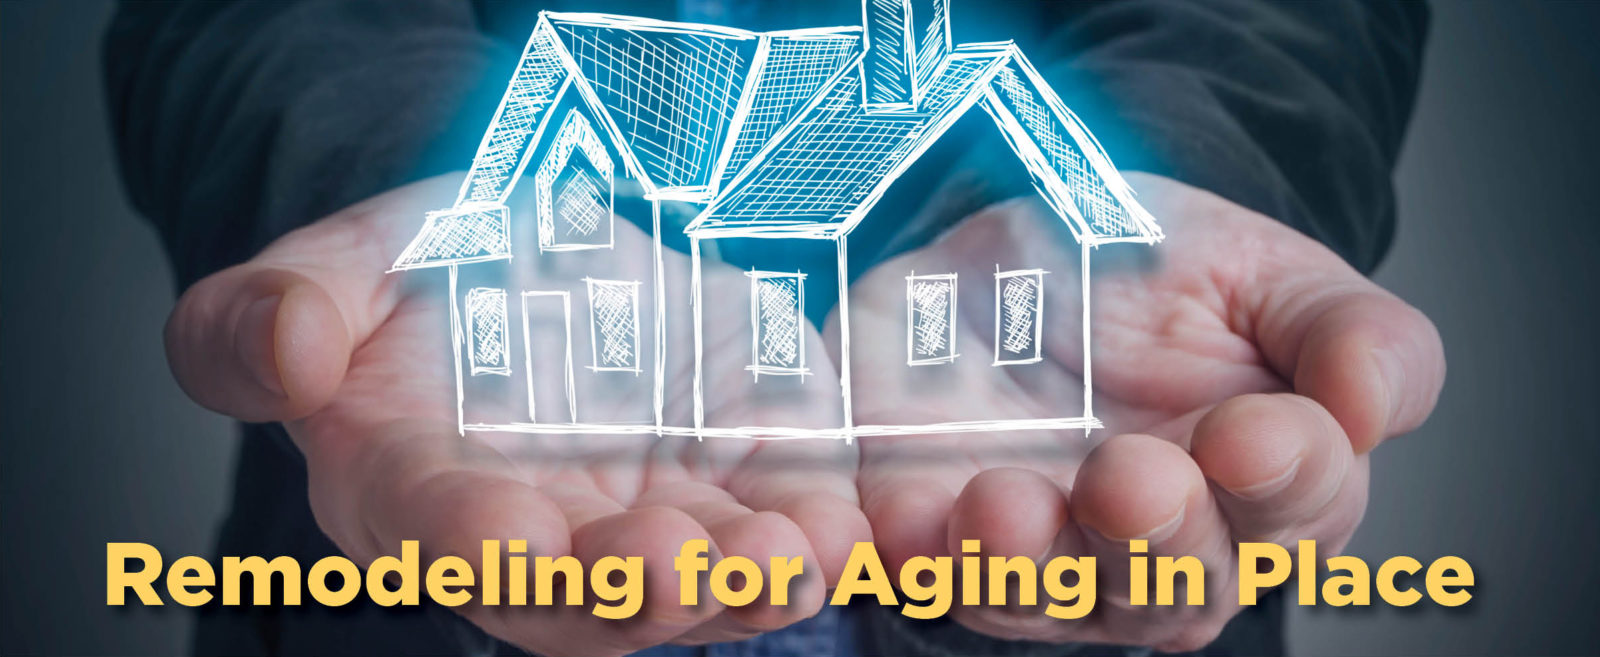 image of two hands, palms up, holding the outline of a home, with text that reads "Remodeling for Aging in Place"